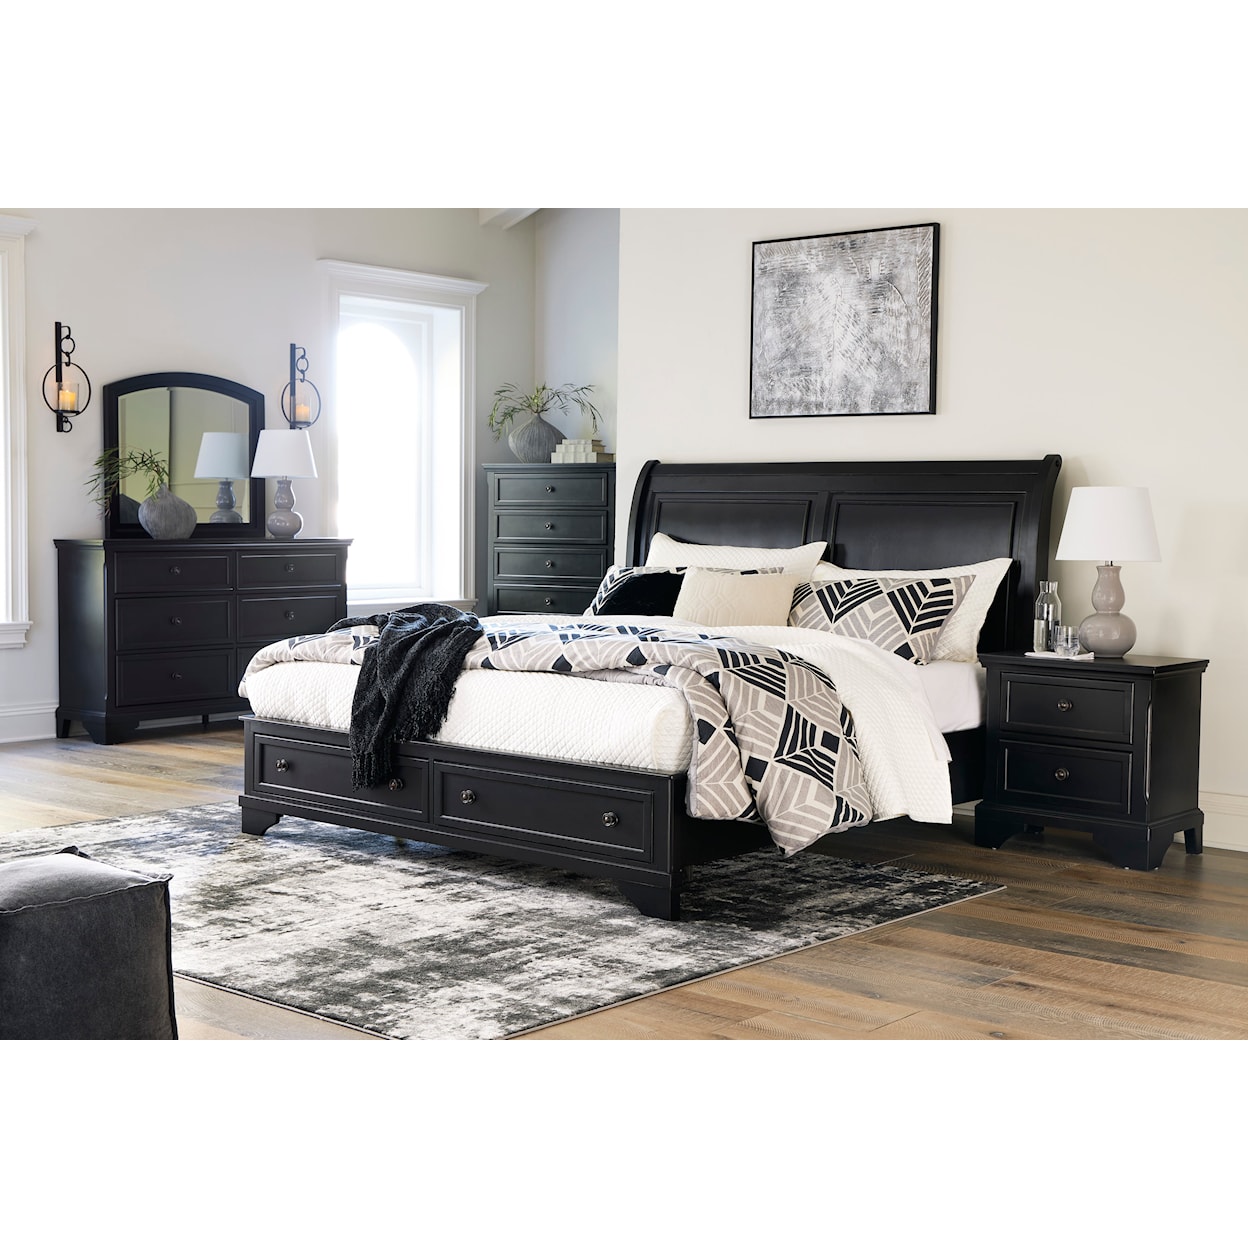 Signature Design by Ashley Chylanta Queen Bedroom Set